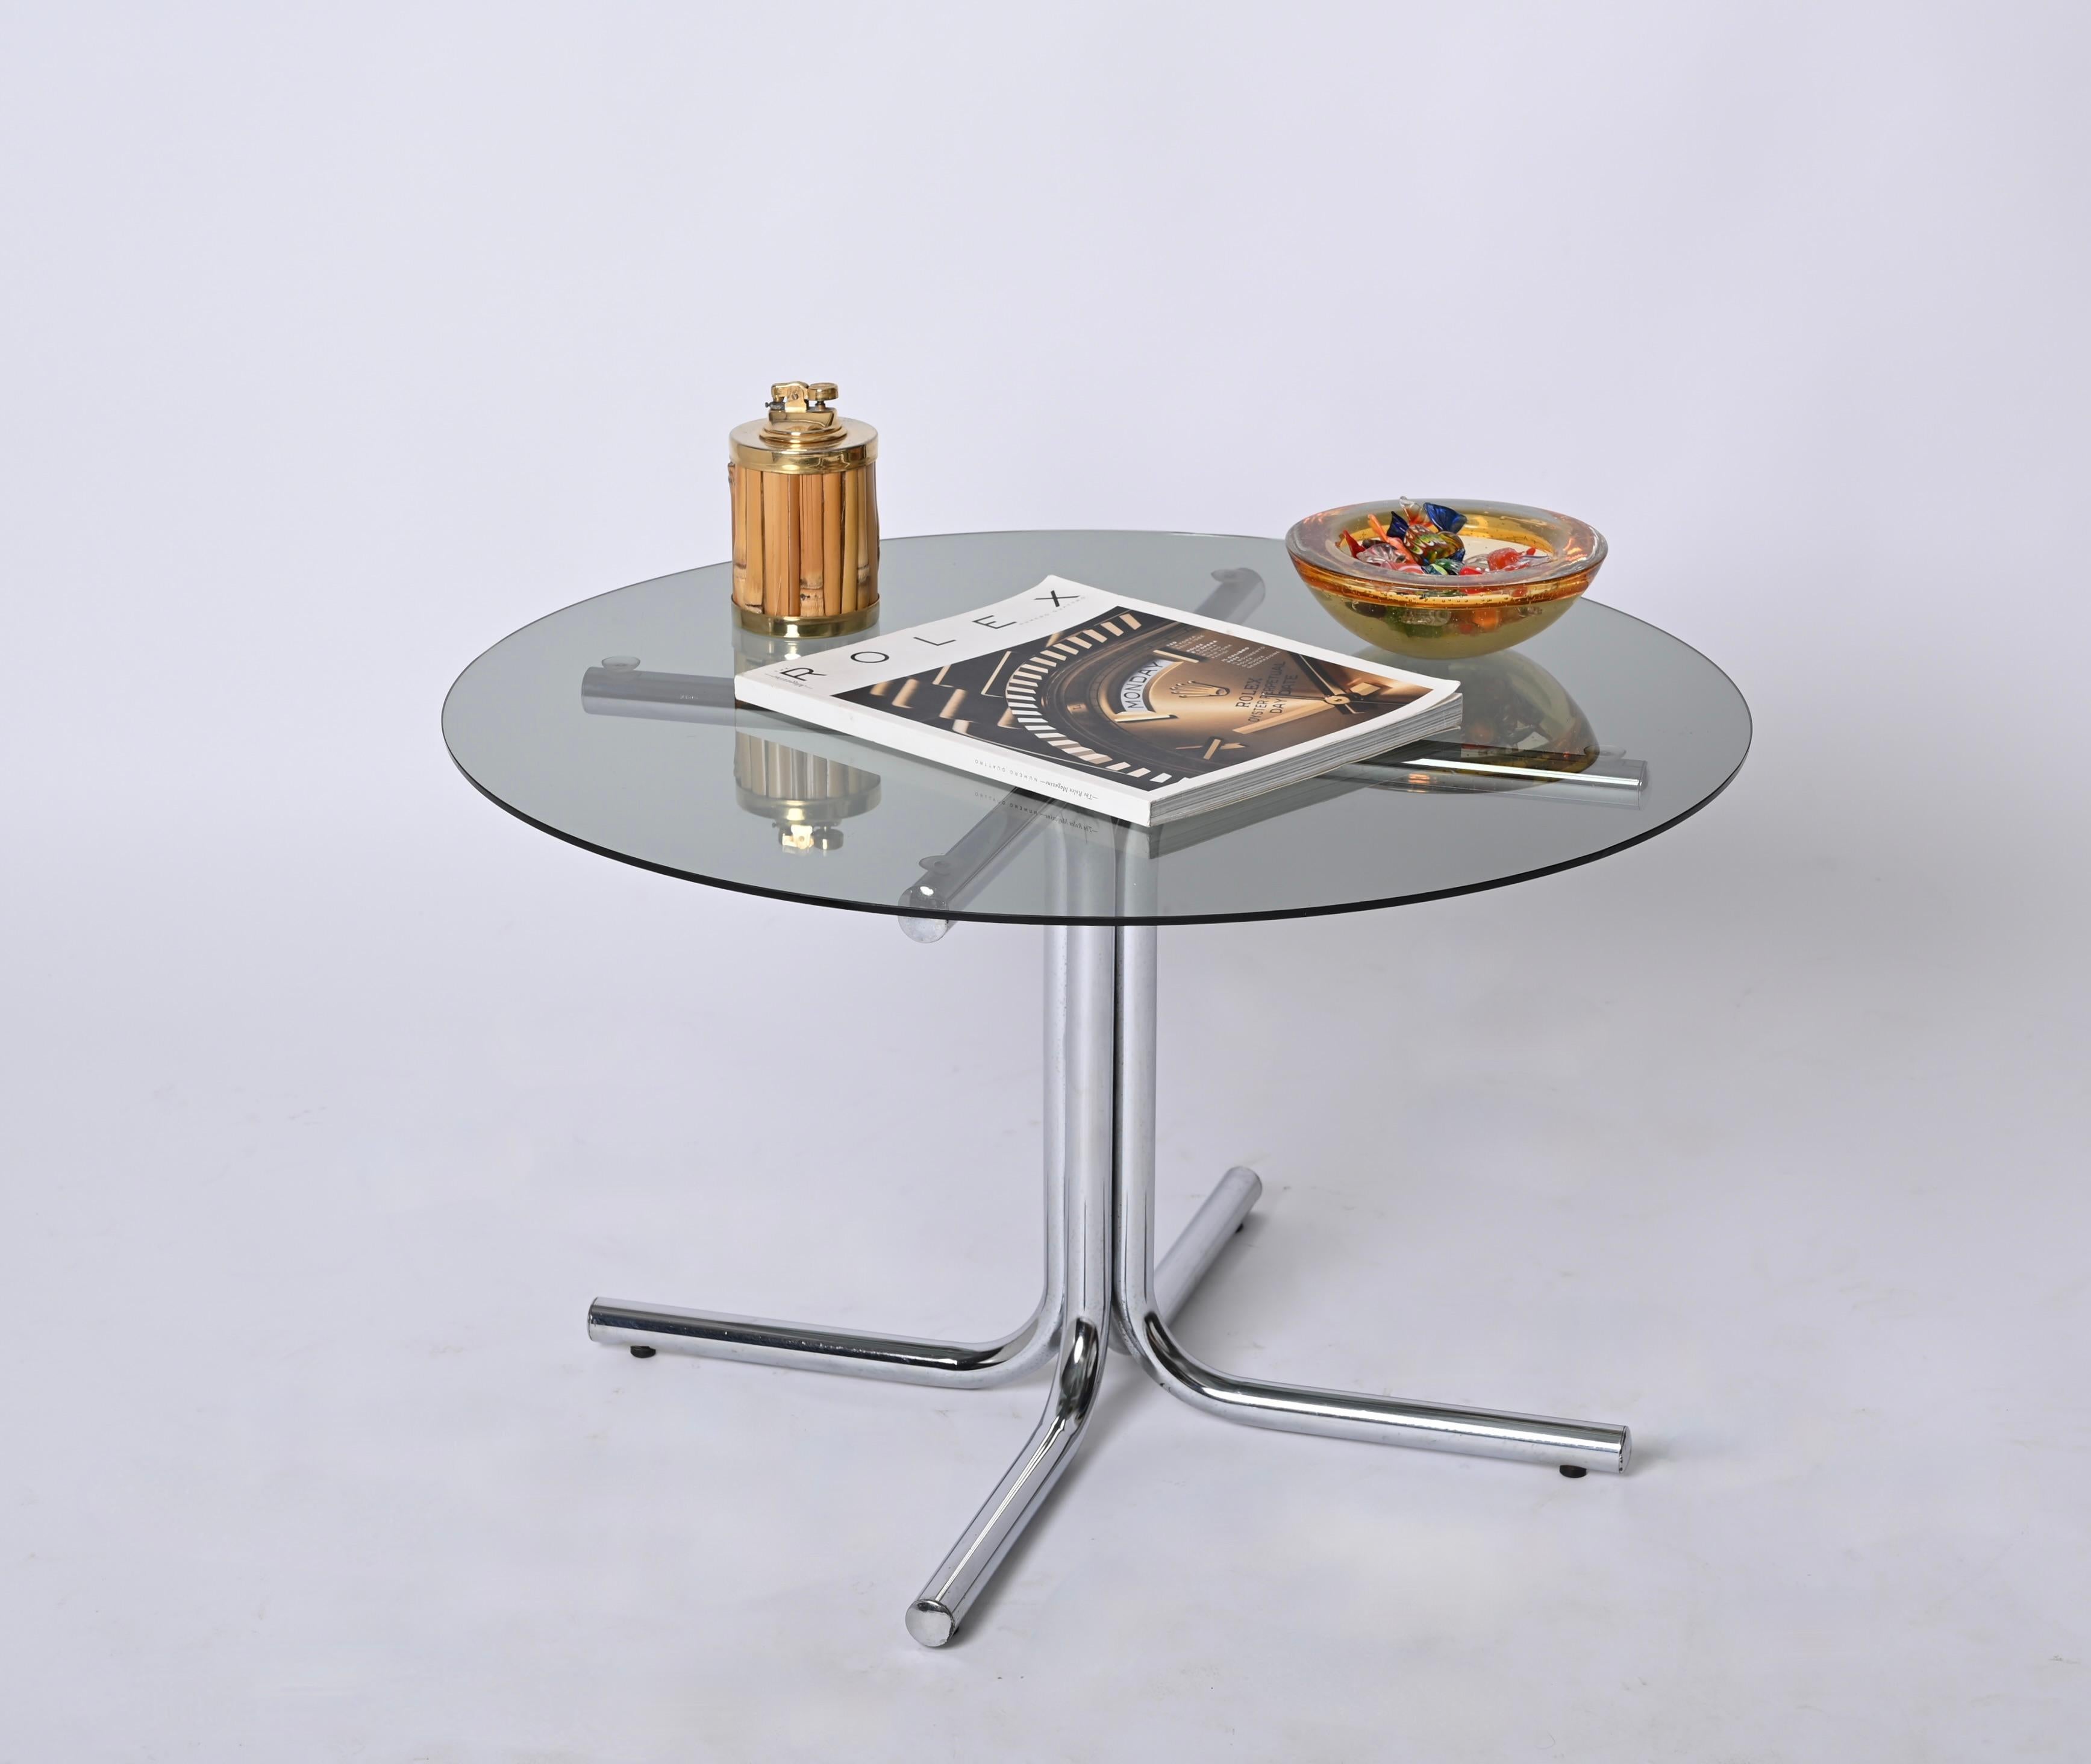 Beautiful coffee table in chromed metal with smoked glass top. This lovely table was designed in Italy in the 1970s in the style of Giotto Stoppino.

This charming round table feature a tubular curved base in chrome with a smoked glass top.  

A